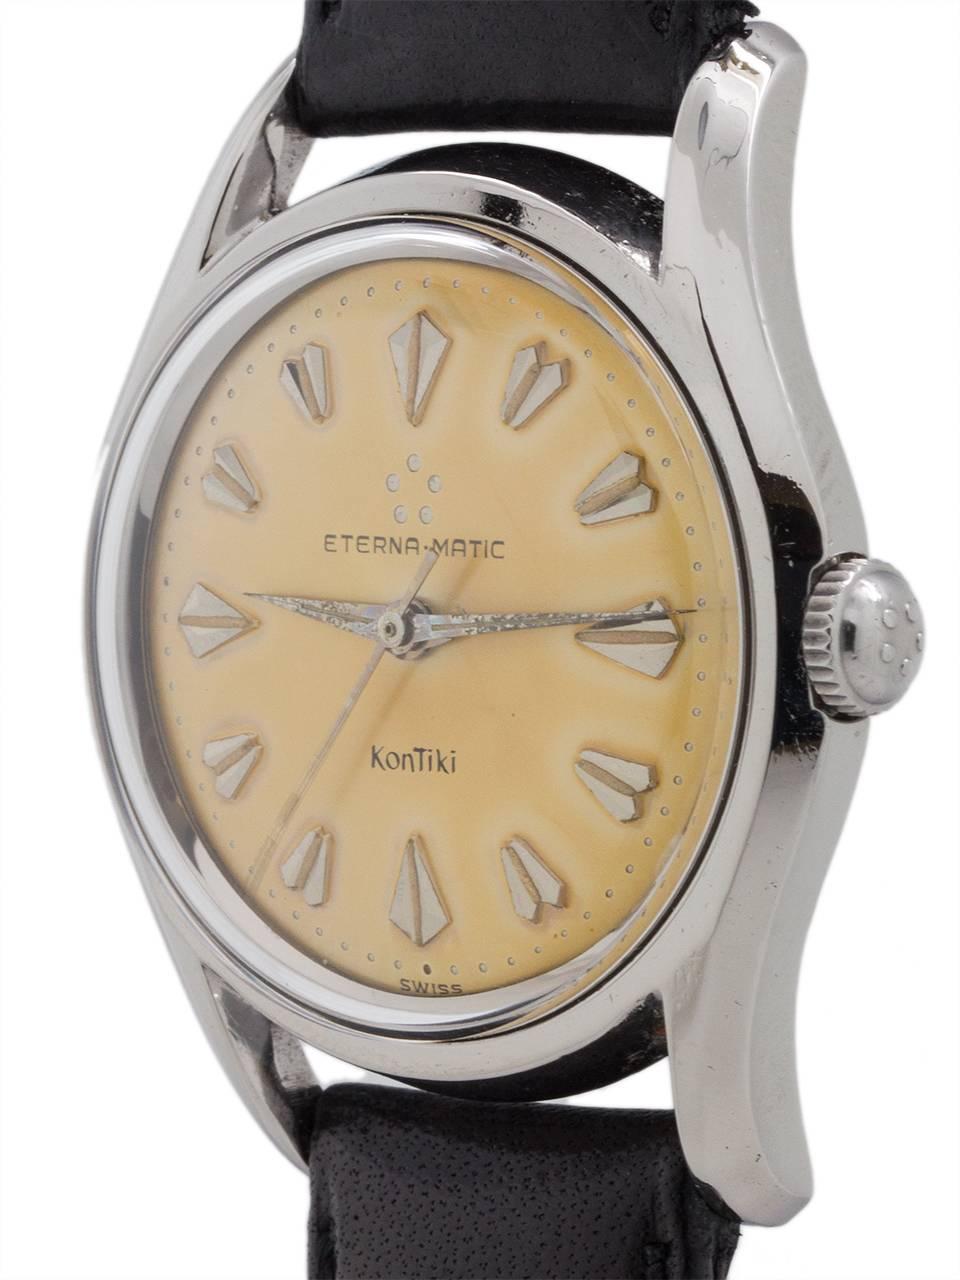 Eterna SS Eternamatic circa 1950’s. 34 X 42mm screw back case with extended curved lugs. Original 2 tone matte silvered dial with a beautiful golden patina and raised arrowhead indexes, tapered dauphine style hands and self winding movement with